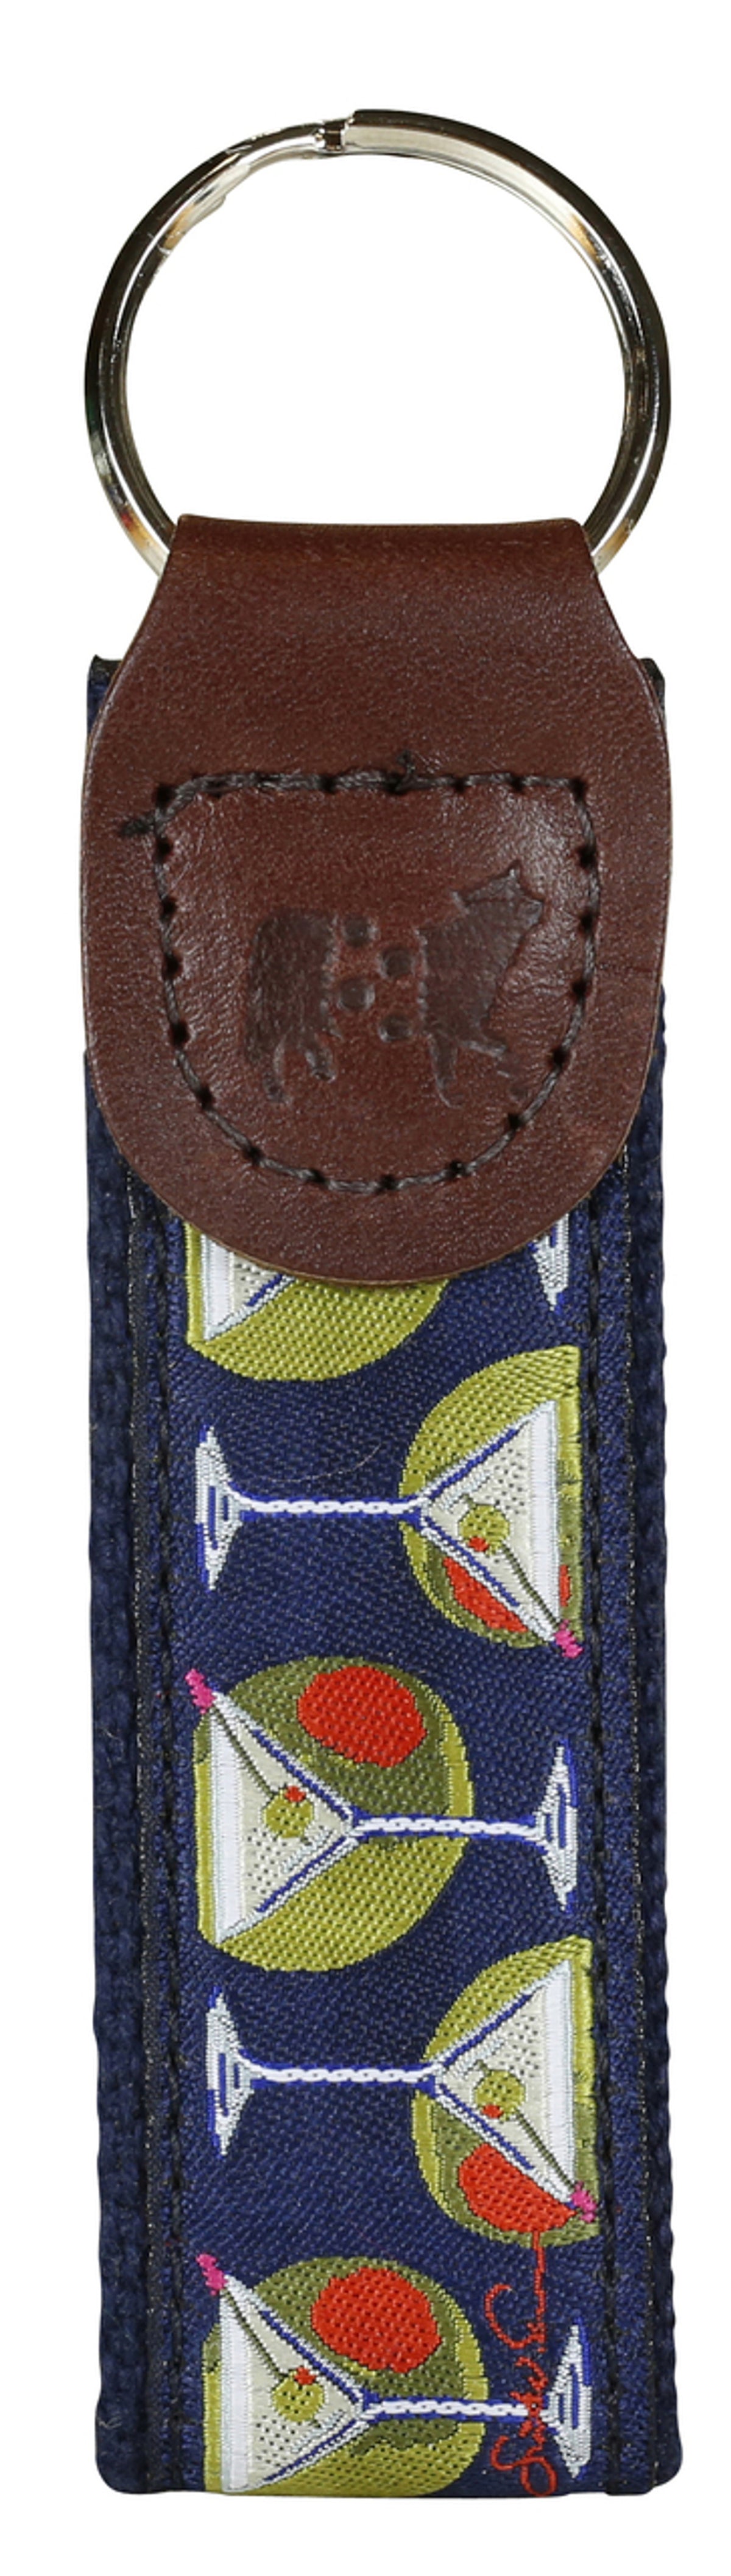 Belted Cow Key Fobs